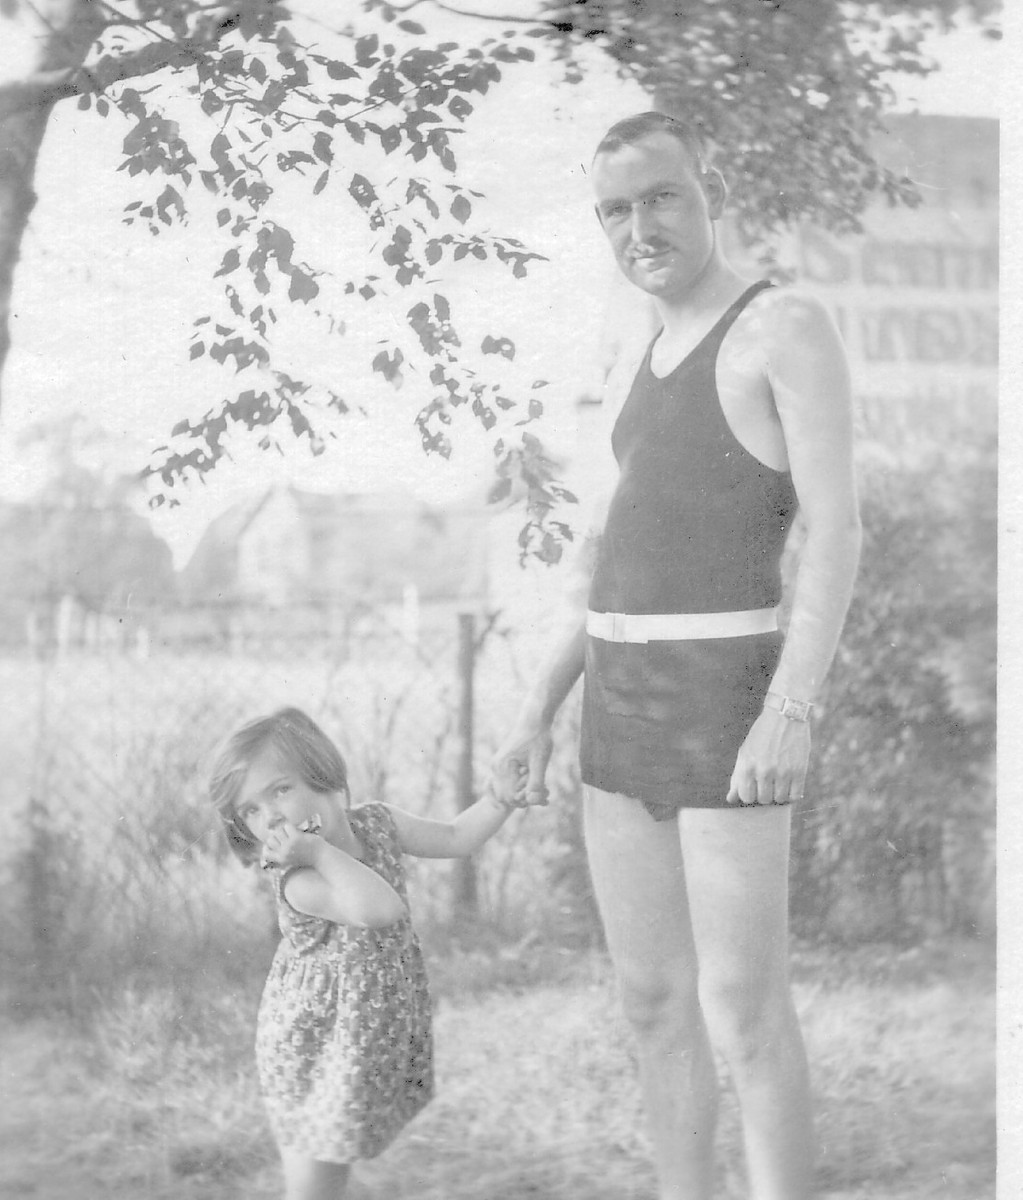 A father and his daughter holding hands posing for the camera.

Pictured are Wilhelm (Willi) Weinlaub (older brother of Kurt) and his daughter Edith.  They lived in Hannover, Germany until 1934, when they moved to England.